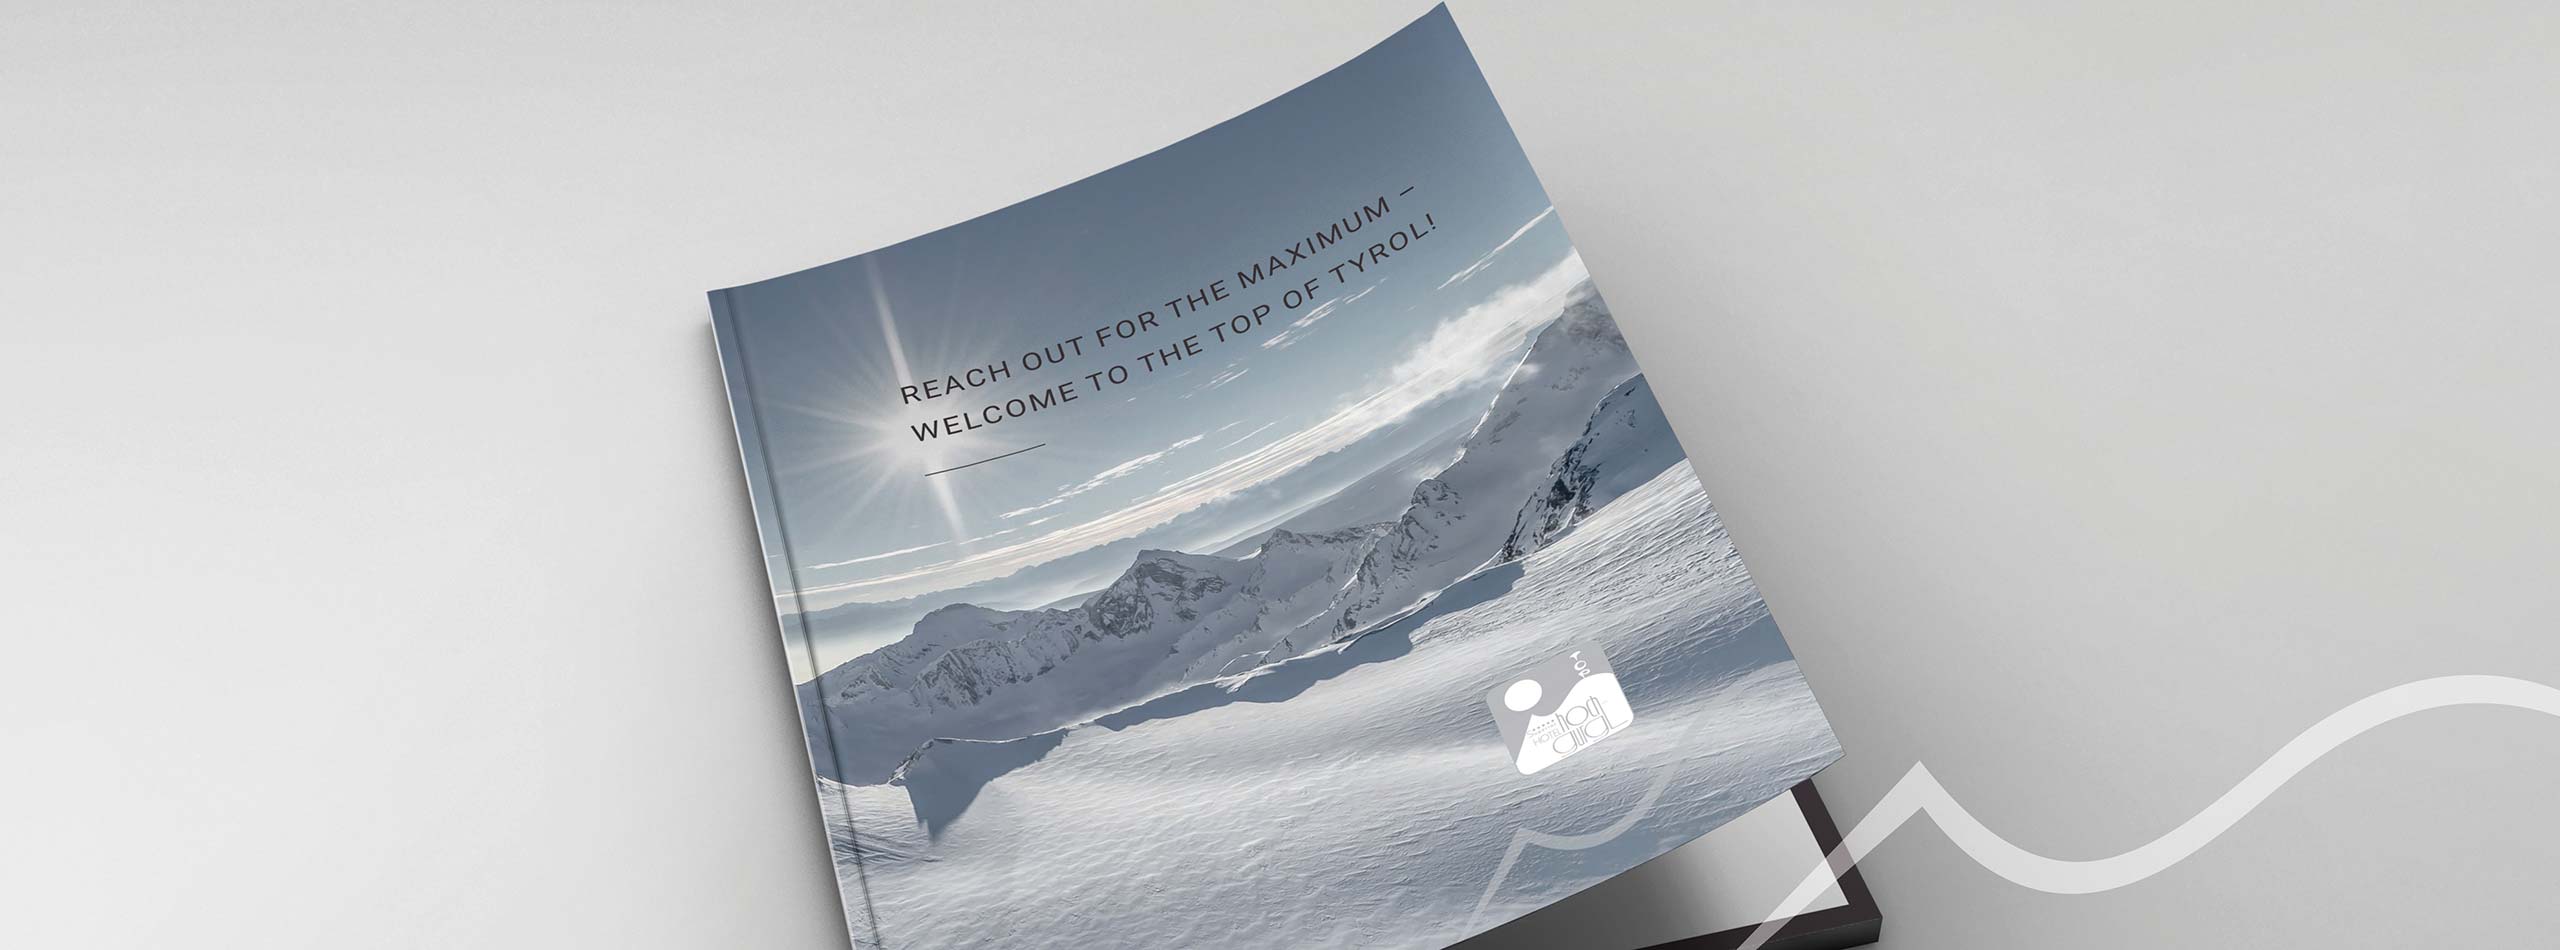 TOP Hotel Hochgurgl downloads Brochures. SPA treatments. Packages